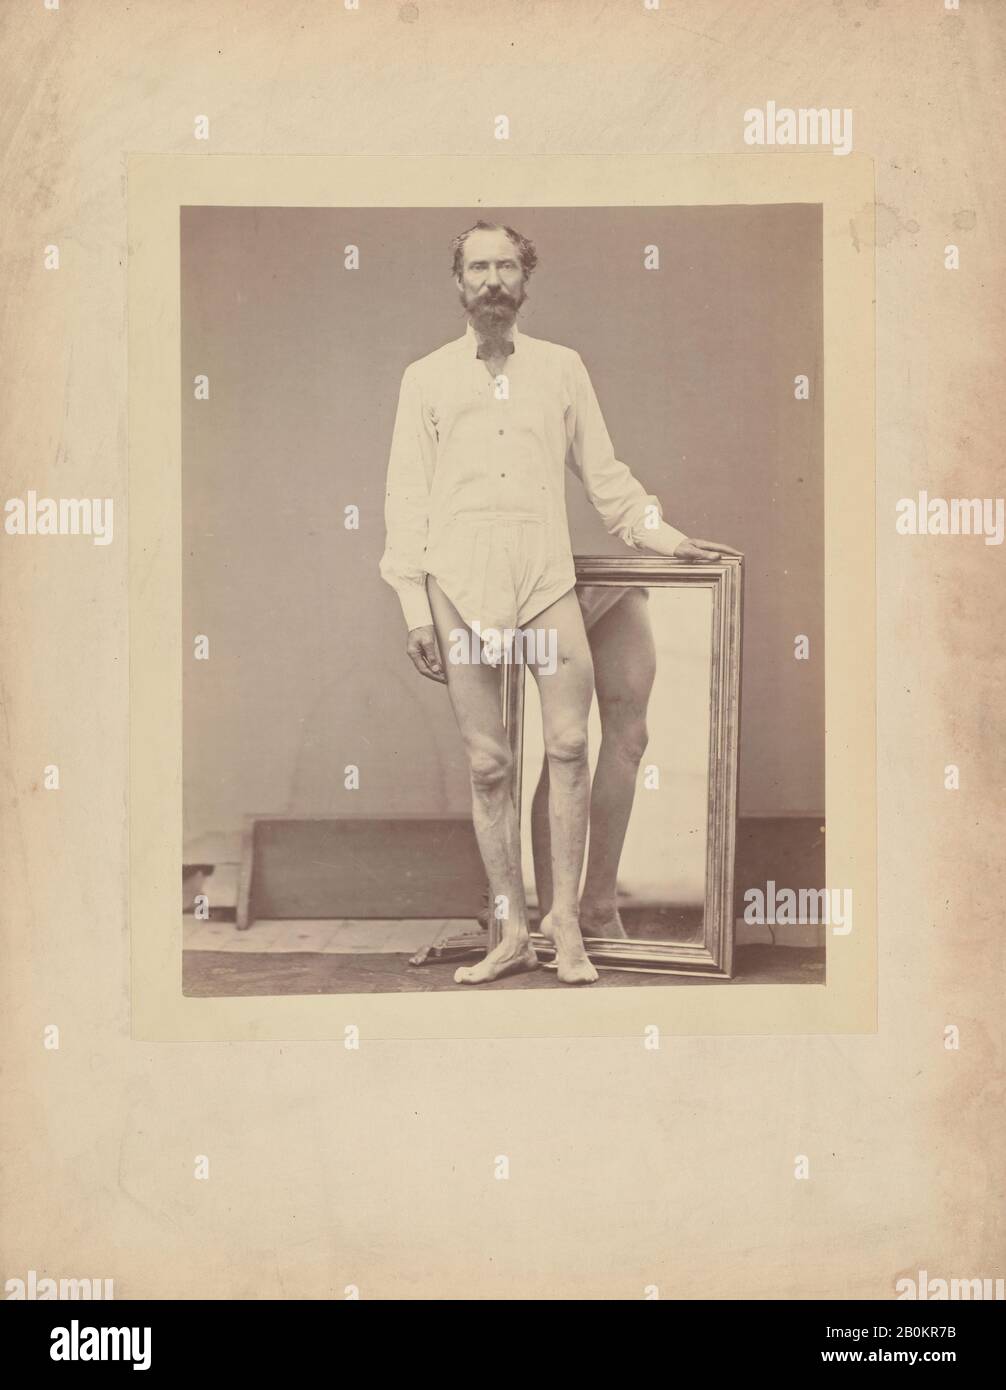 William Bell, Gunshot Wound of Middle Third of Left Femur, William Bell (American (born England) Liverpool 1831–1910 Philadelphia, Pennsylvania), 1865–67, Albumen silver print from glass negative, Image: 8 in. × 6 9/16 in. (20.3 × 16.6 cm), Mount: 13 7/8 × 10 7/8 in. (35.2 × 27.7 cm), Photographs Stock Photo